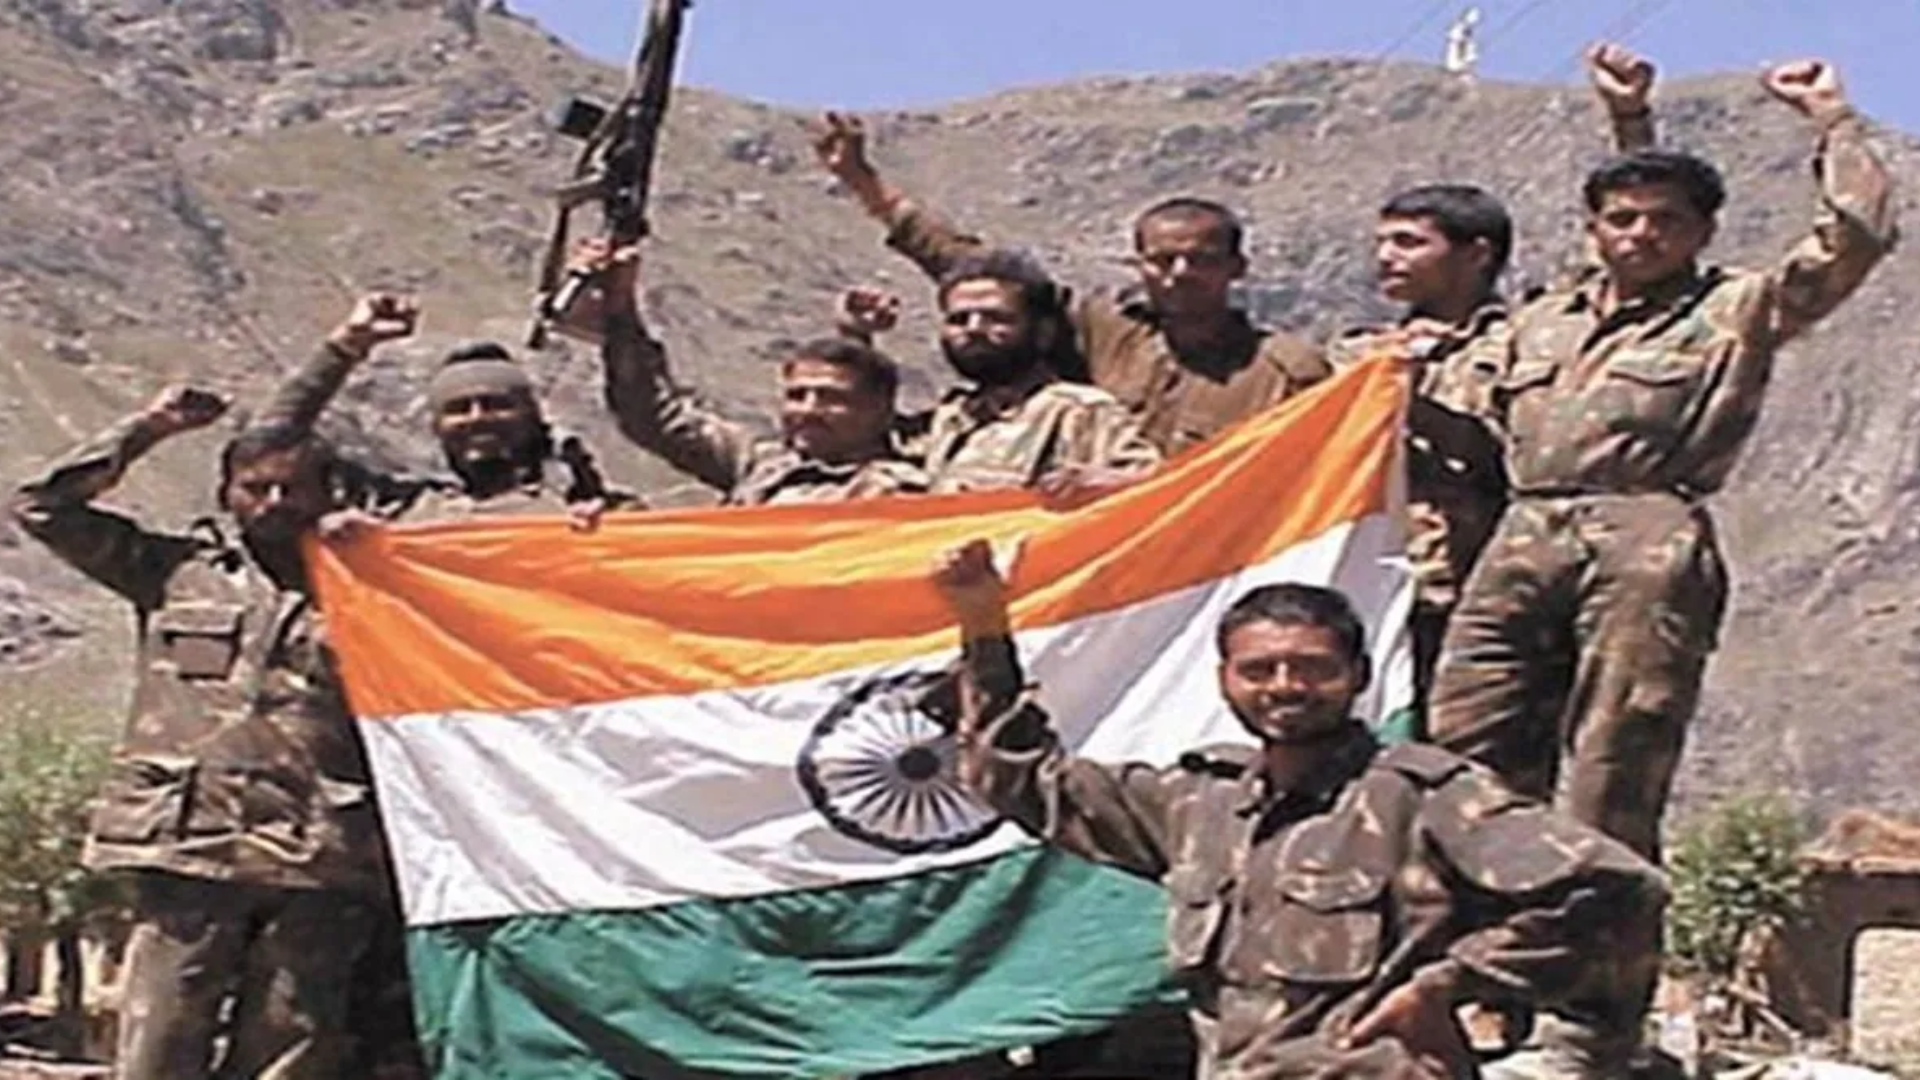 How And Why Did Pakistan Plan The Kargil War?